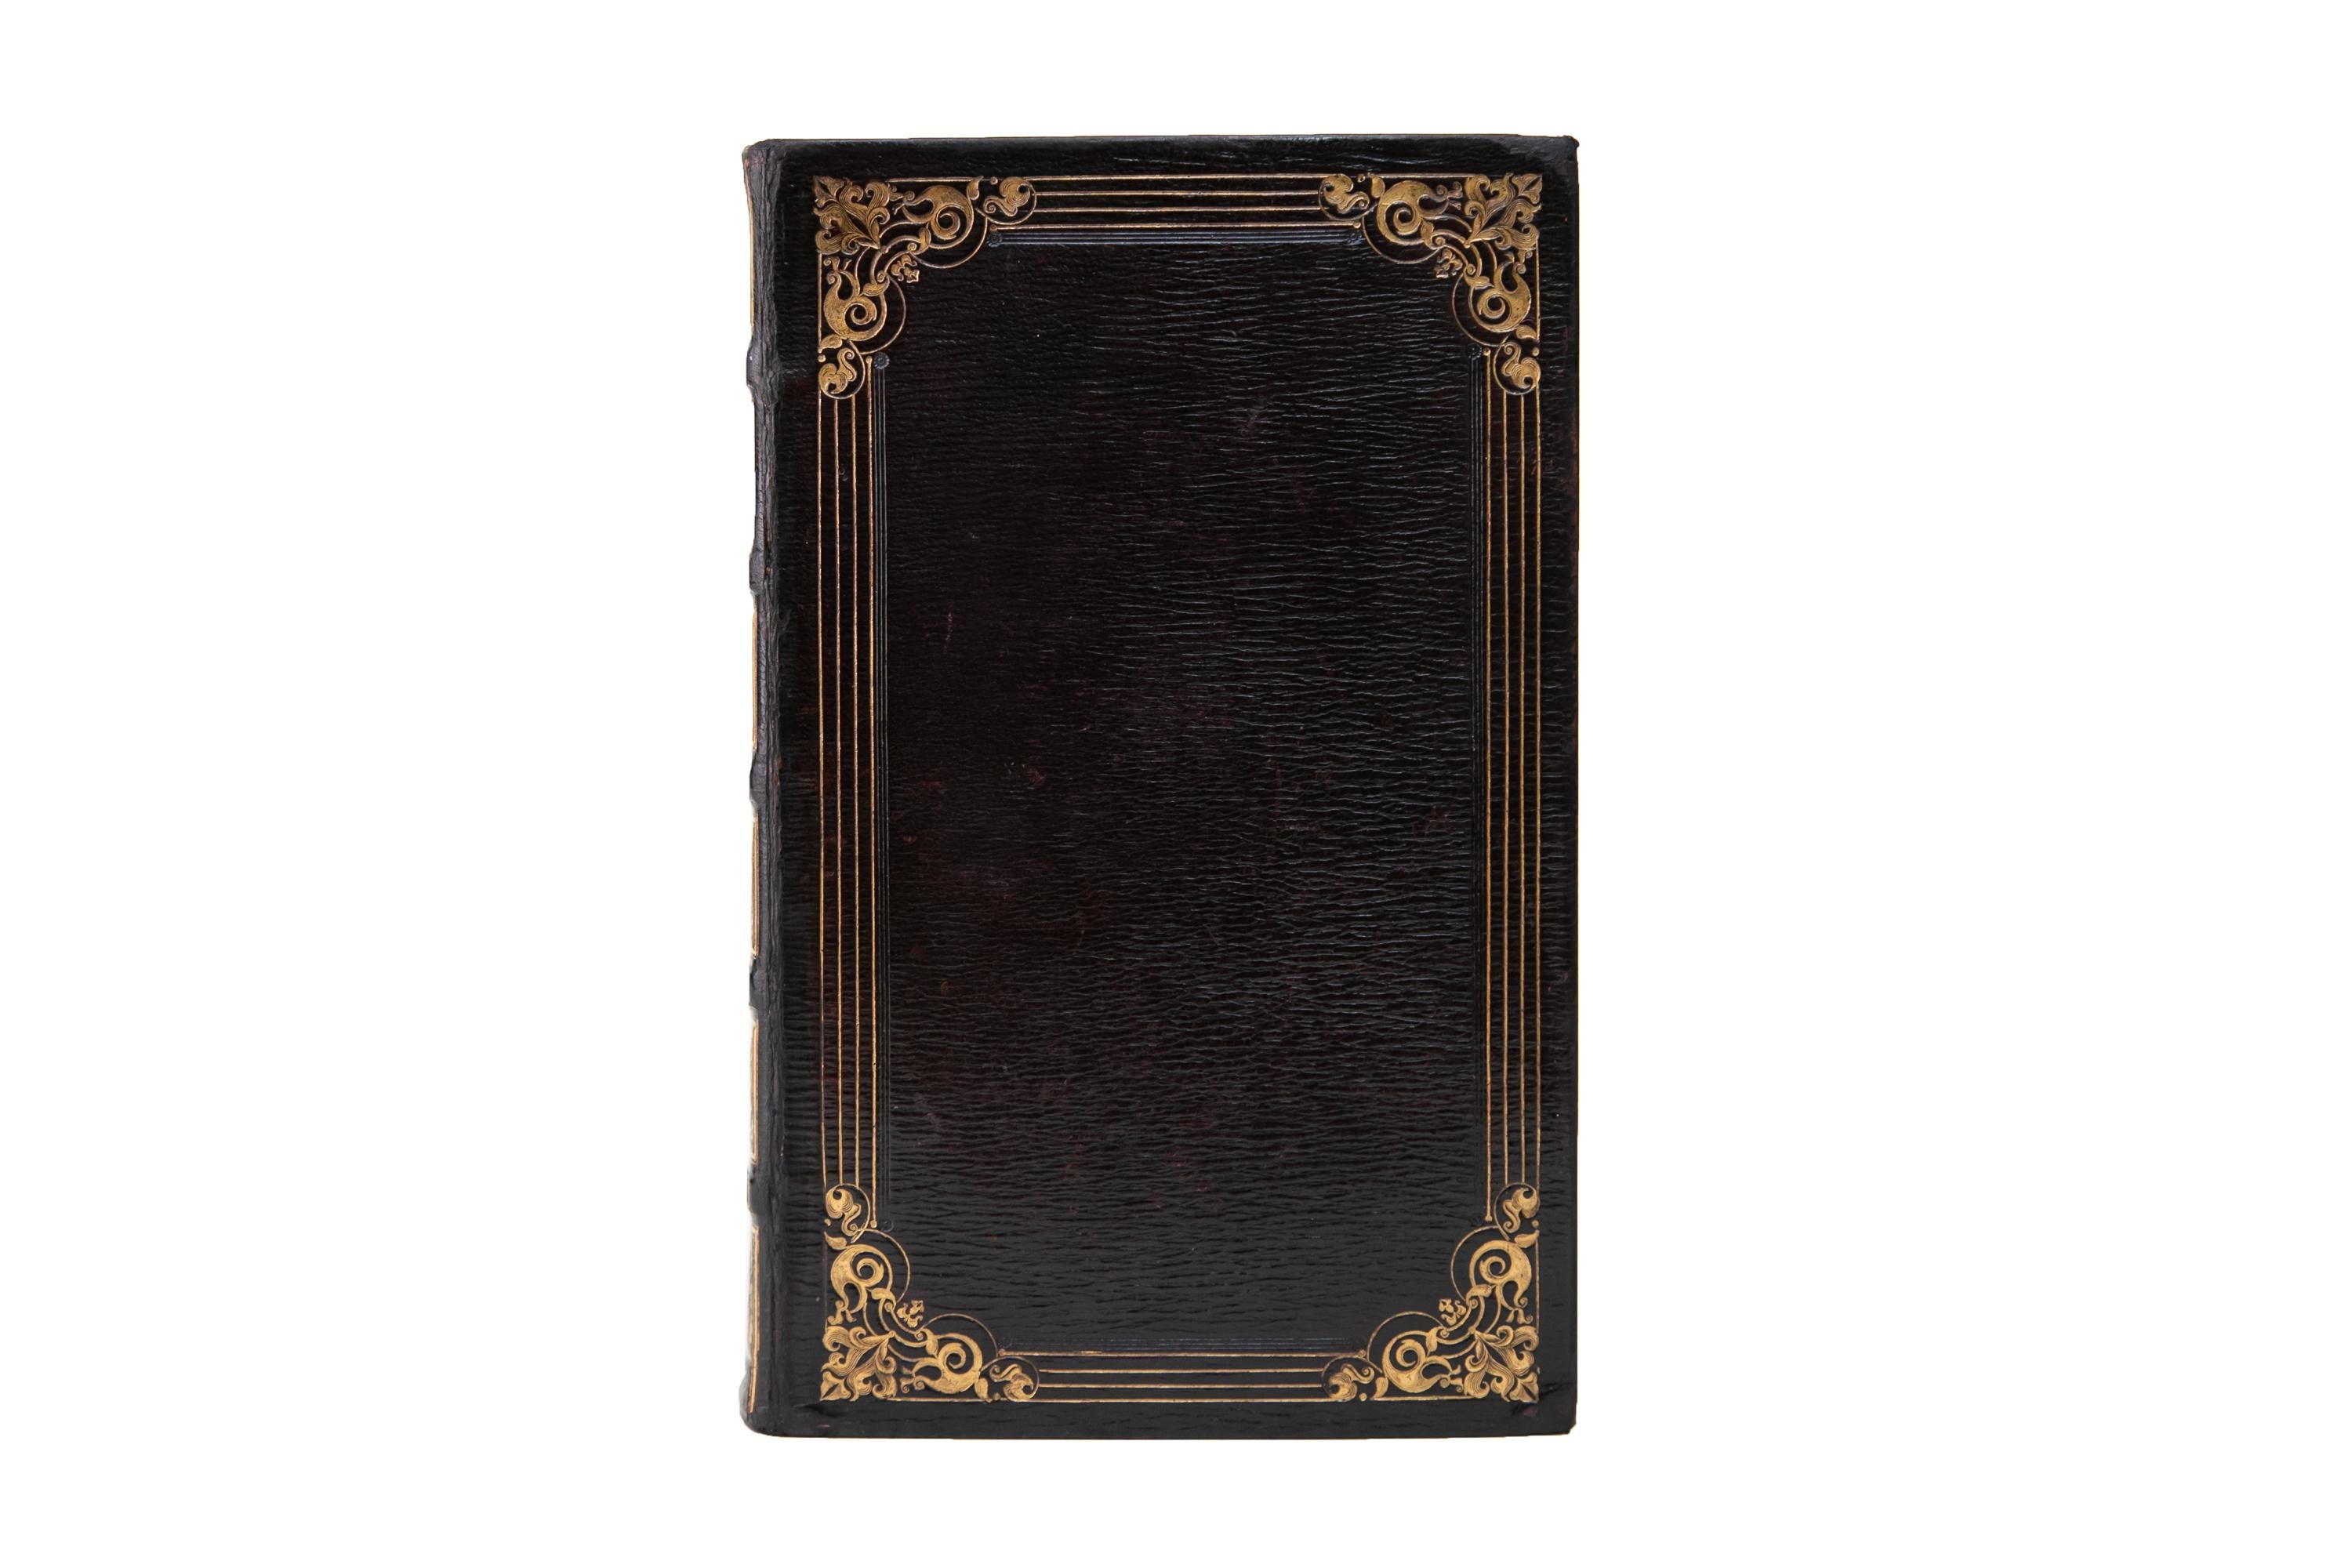 1 Volume. (Anon) The Book of Common Prayer. Bound in full purple morocco with the covers displaying bordering and floral corner flourishes, both gilt-tooled. All of the edges are gilded. Fore-edge painting. Published by The Clarendon Press in